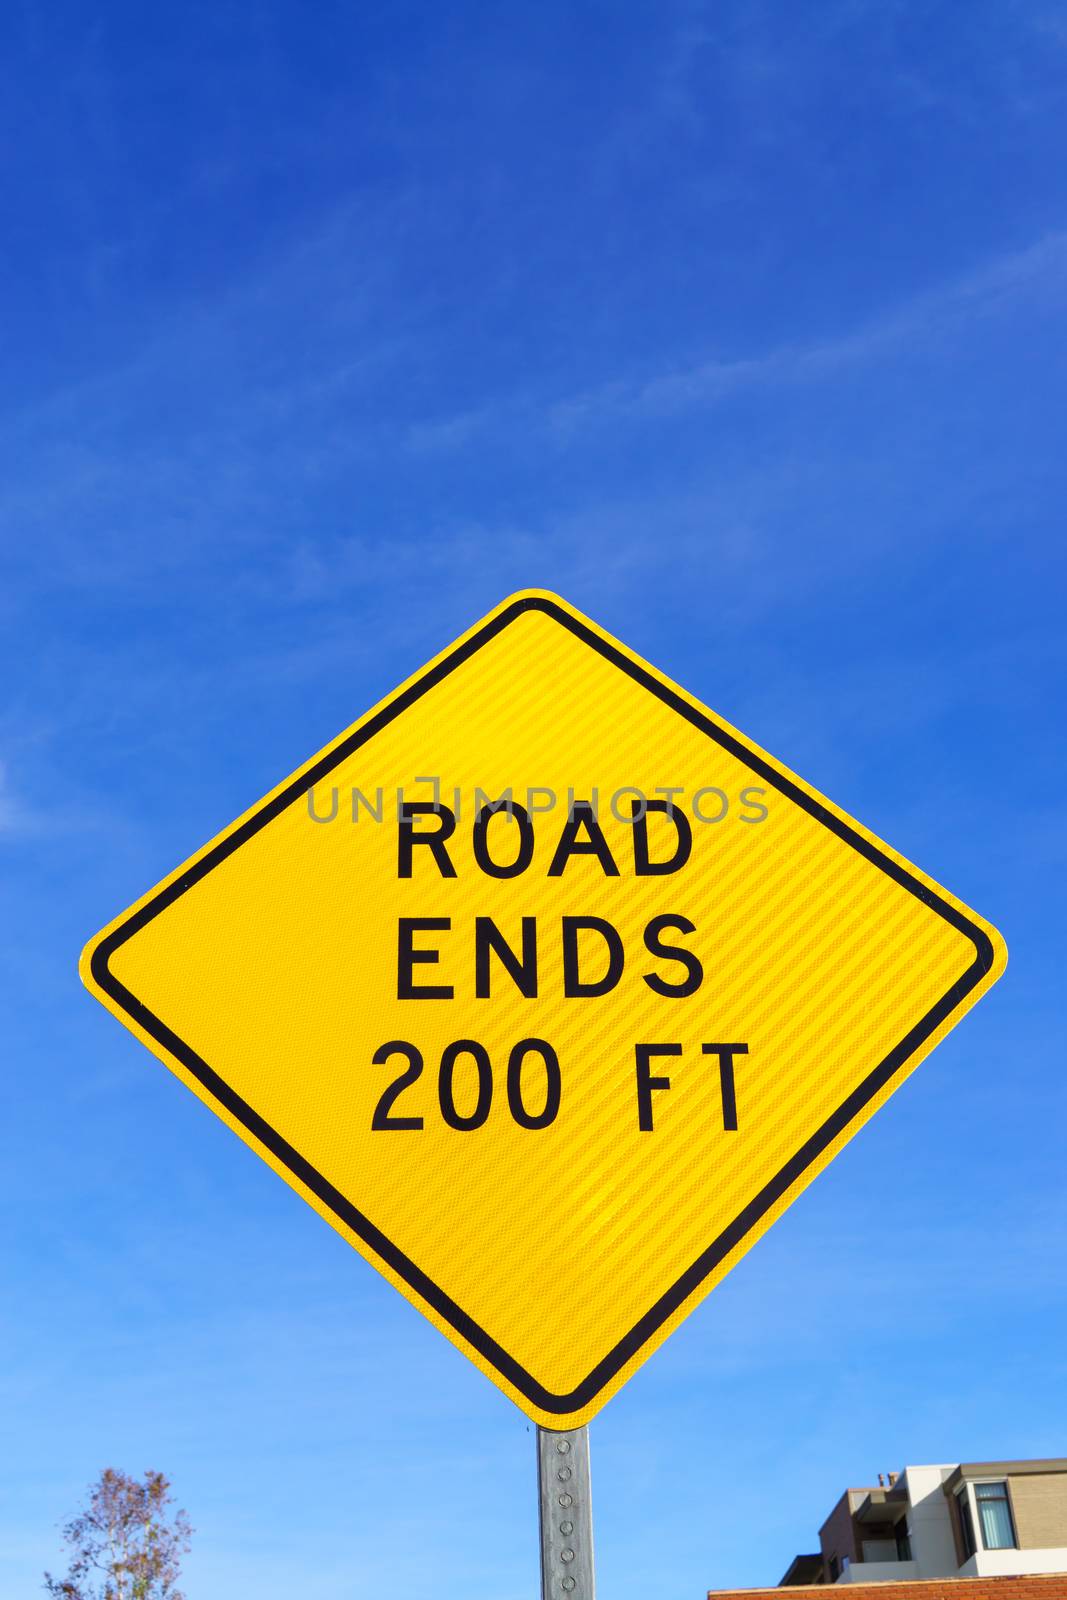 Yellow road ends ahead in 200 feet road sign with black lettering against blue sky.